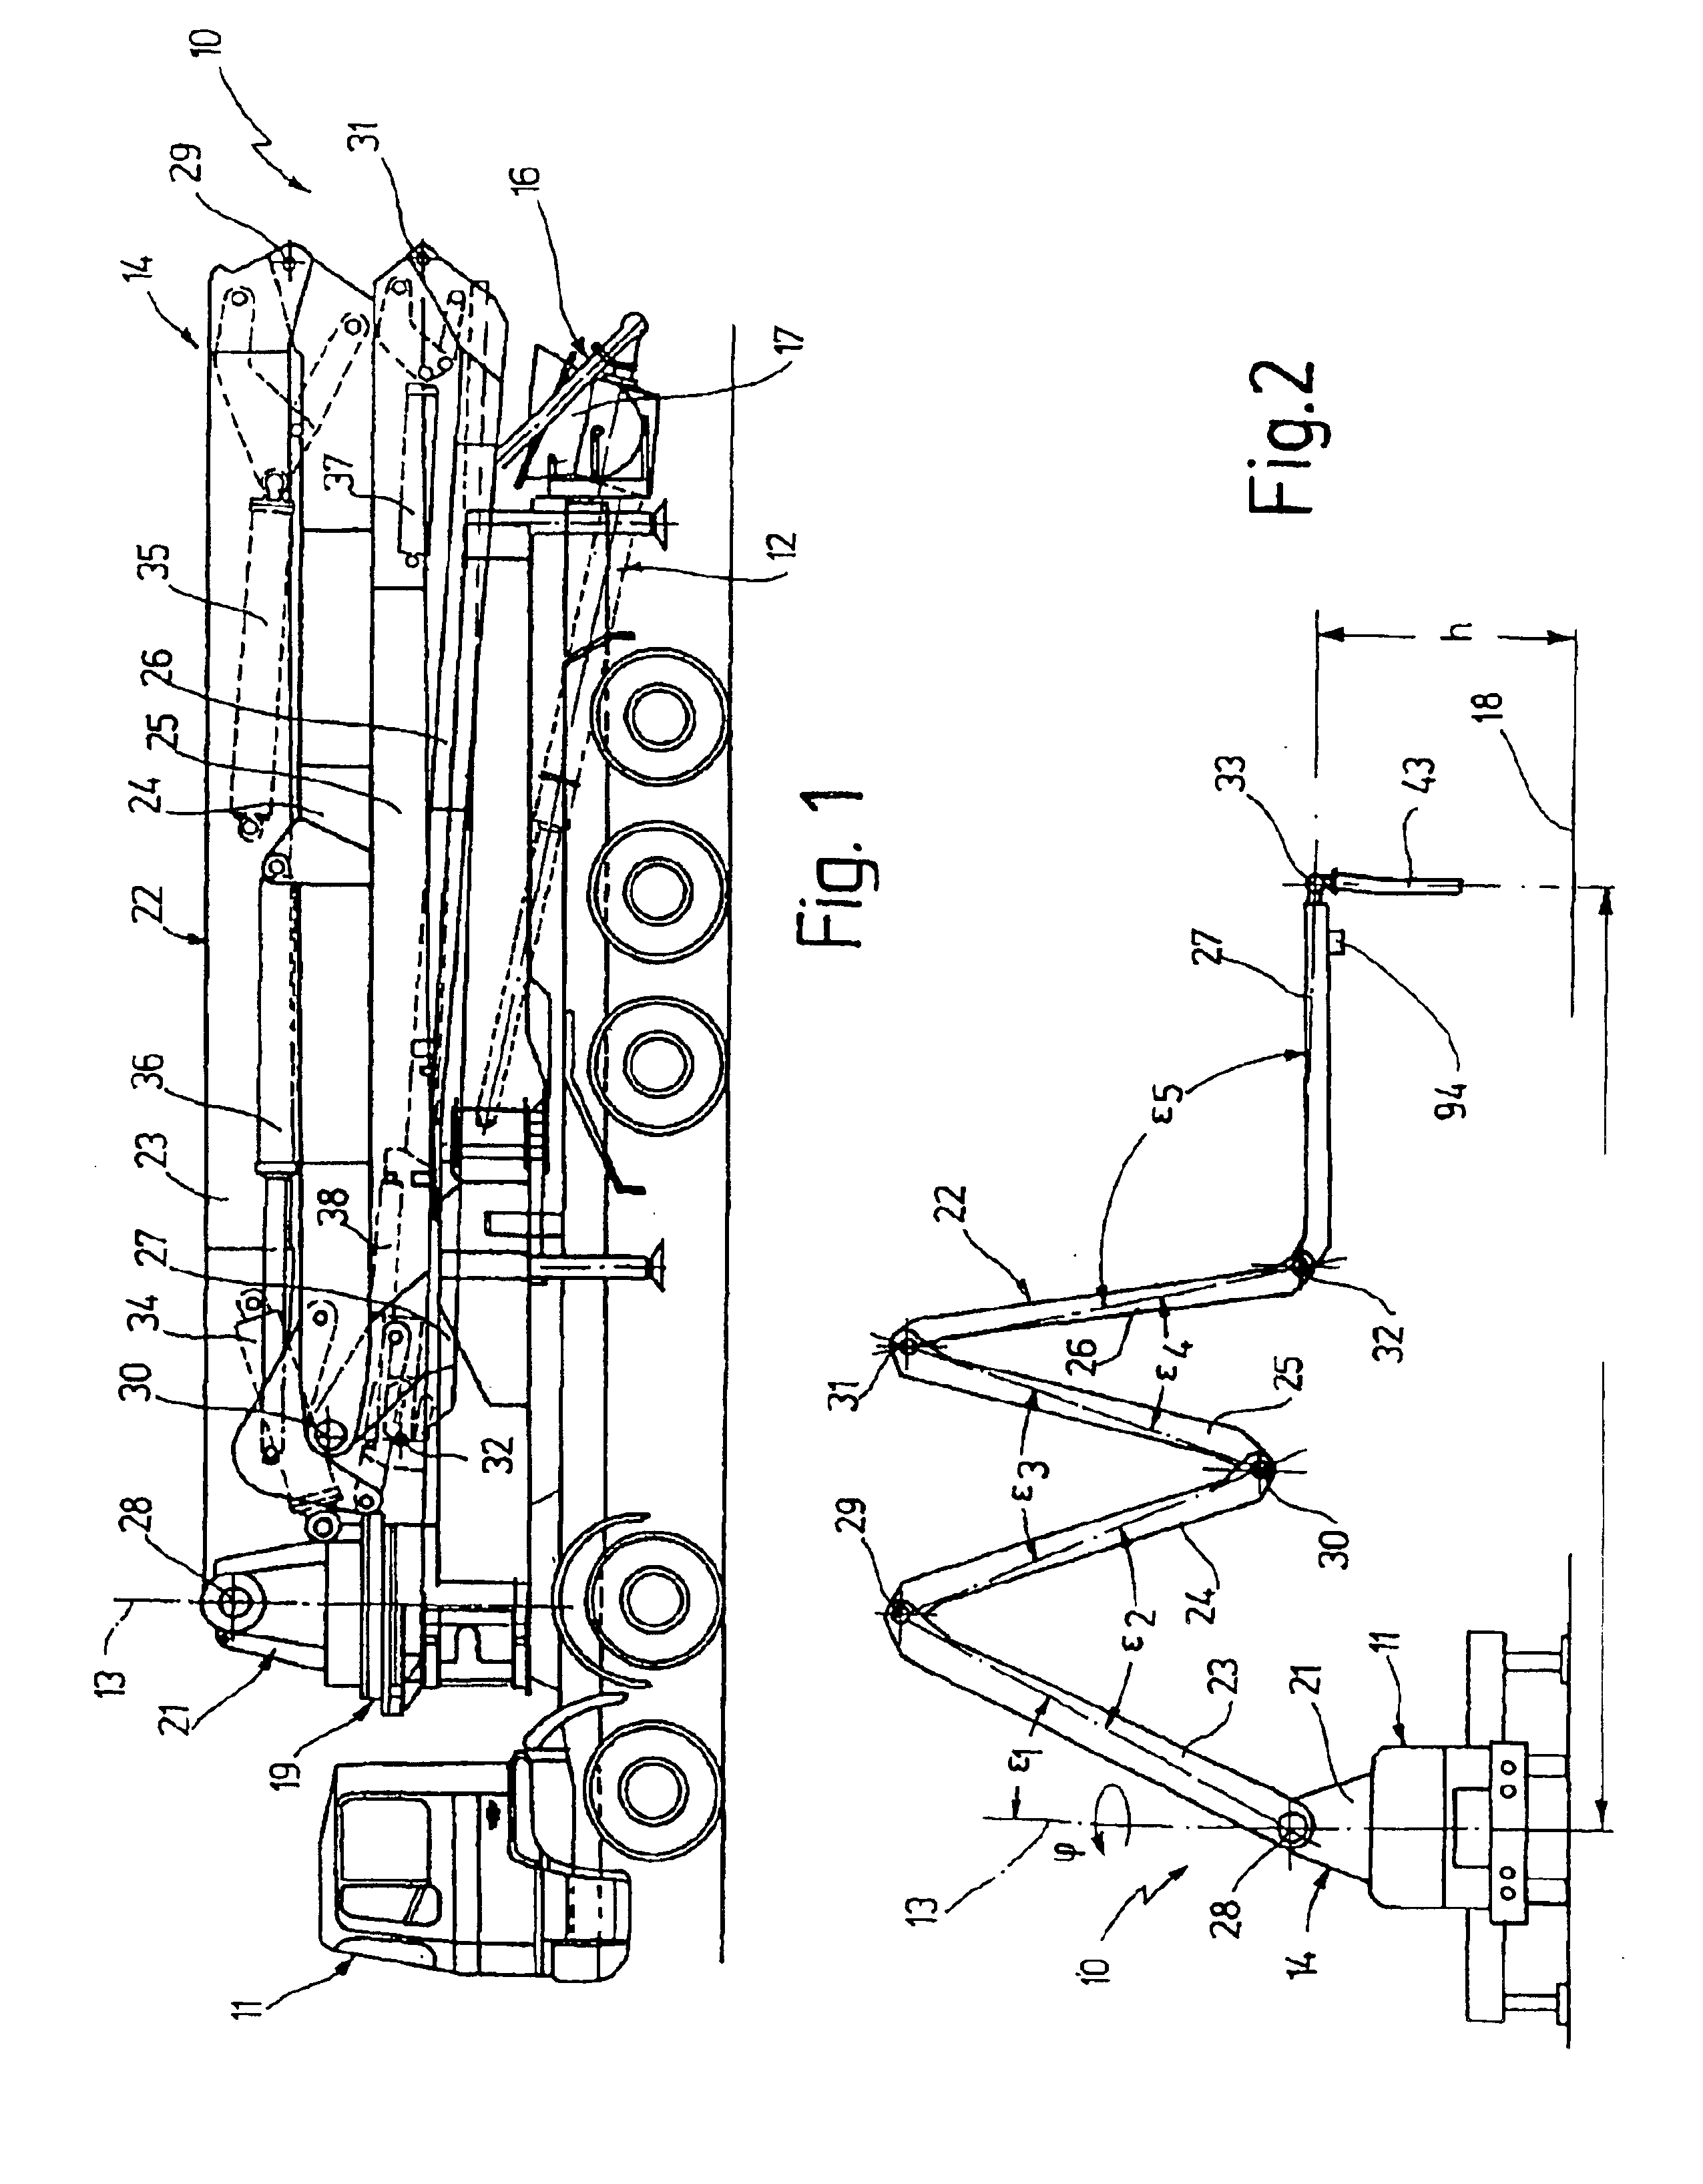 Device for operating the articulated mast of a large manipulator